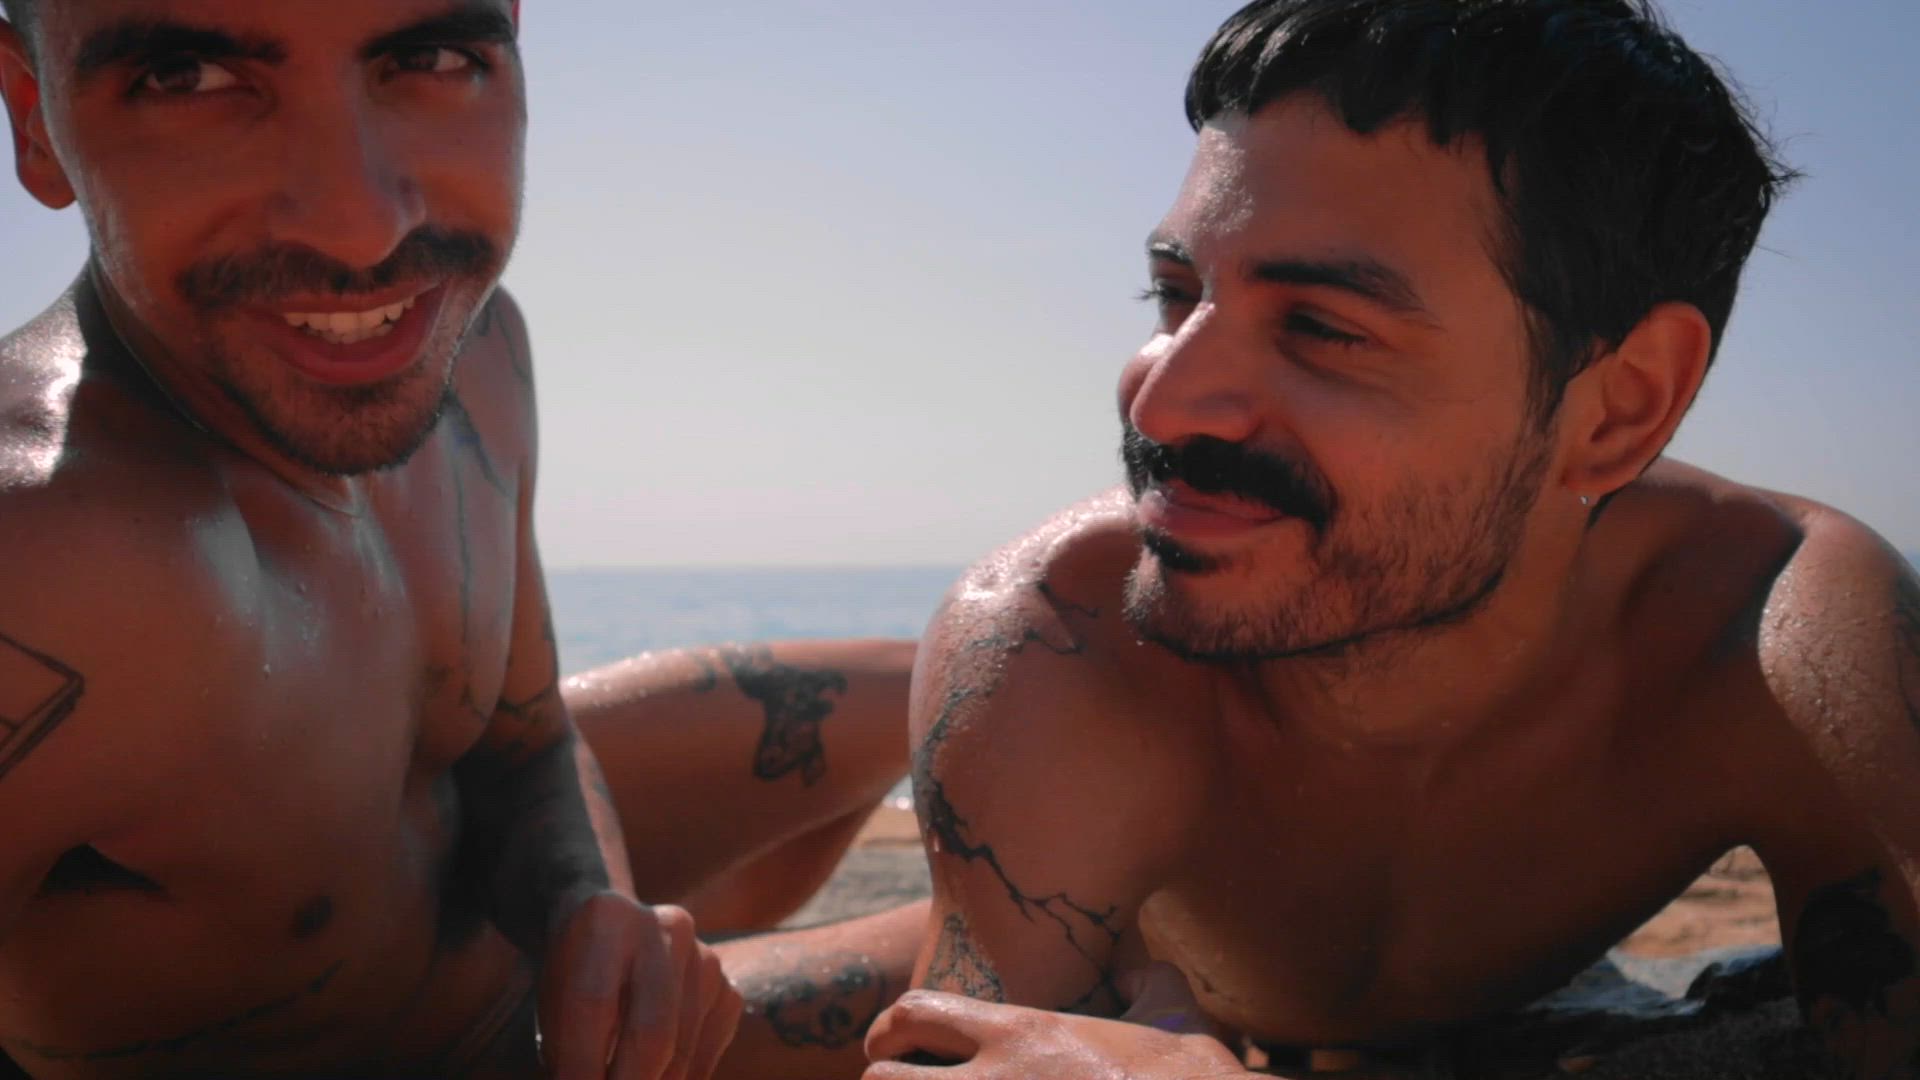 Beach porn video with onlyfans model Pablo y Mati <strong>@pabloandmati</strong>